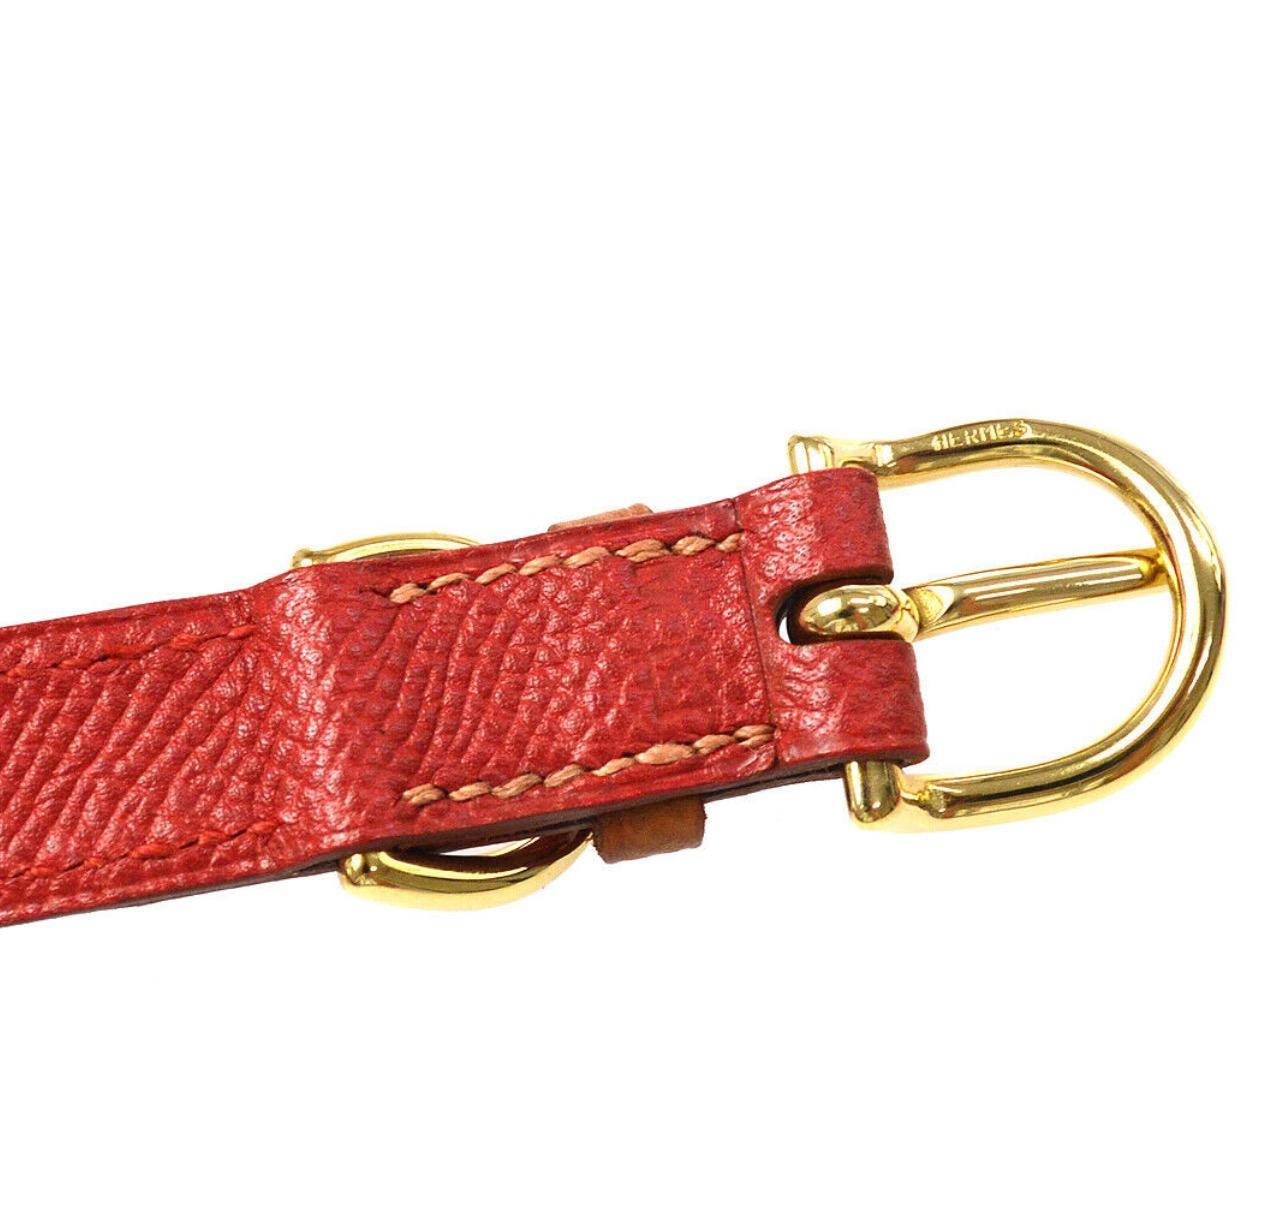 Hermes Dog Red and Brown Leather Gold Pet Dog Leash Only in Box 1